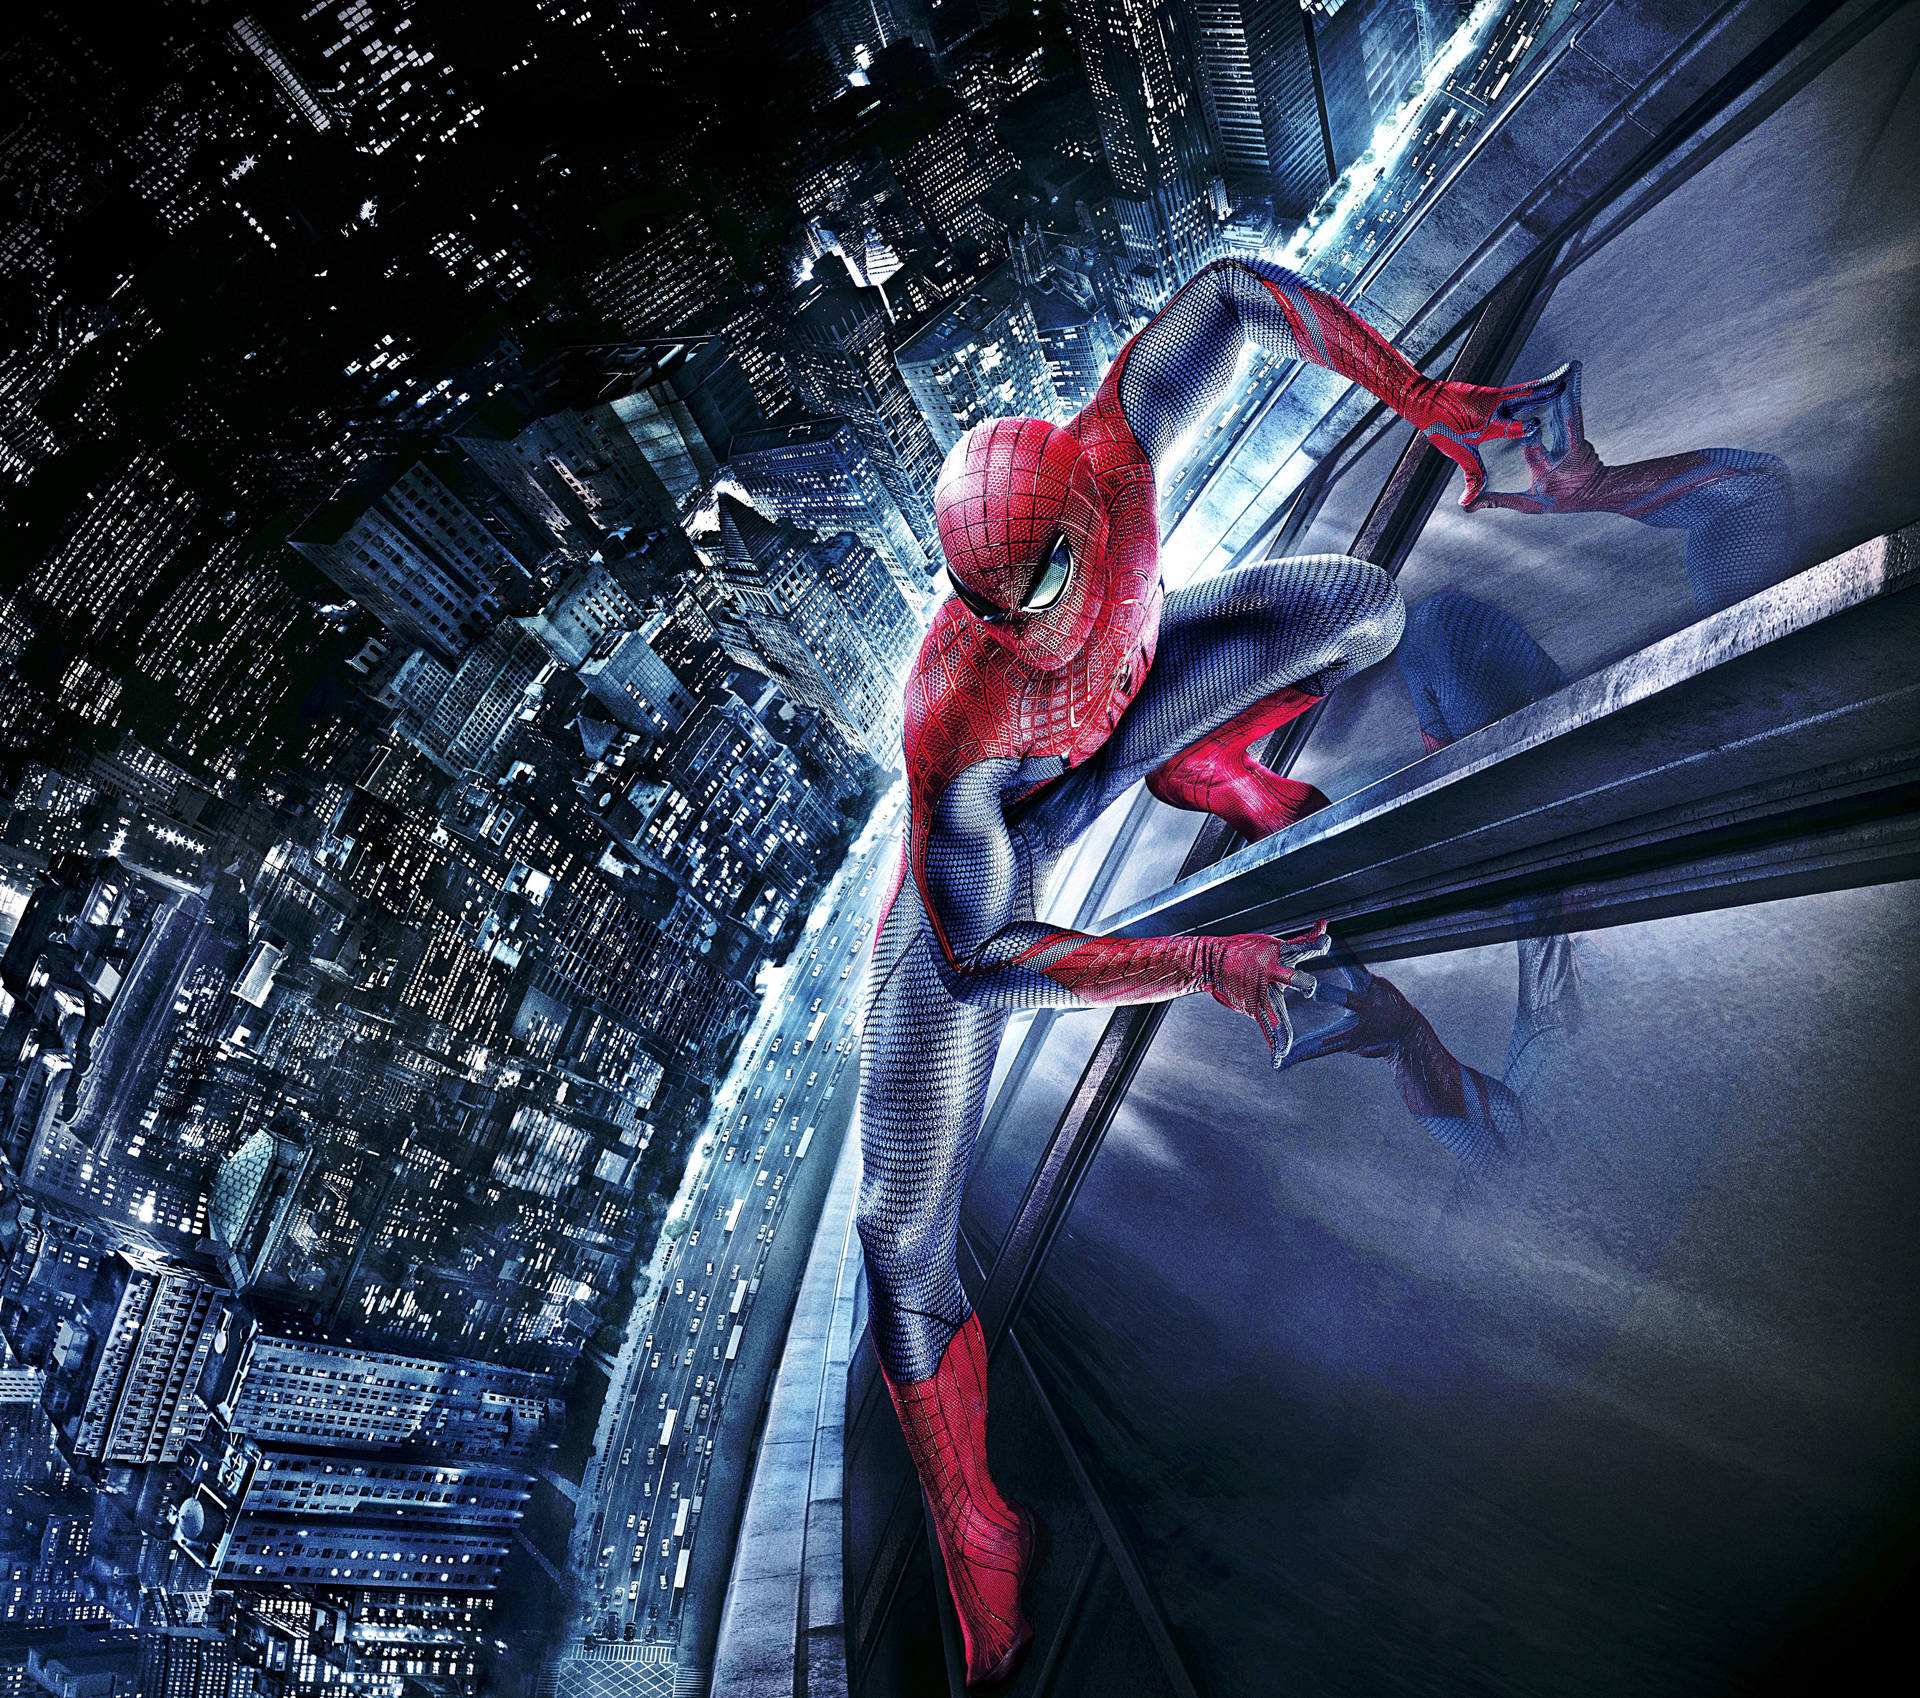 Peter Parker balances superhero life and everyday challenges in The Amazing Spider-Man Wallpaper